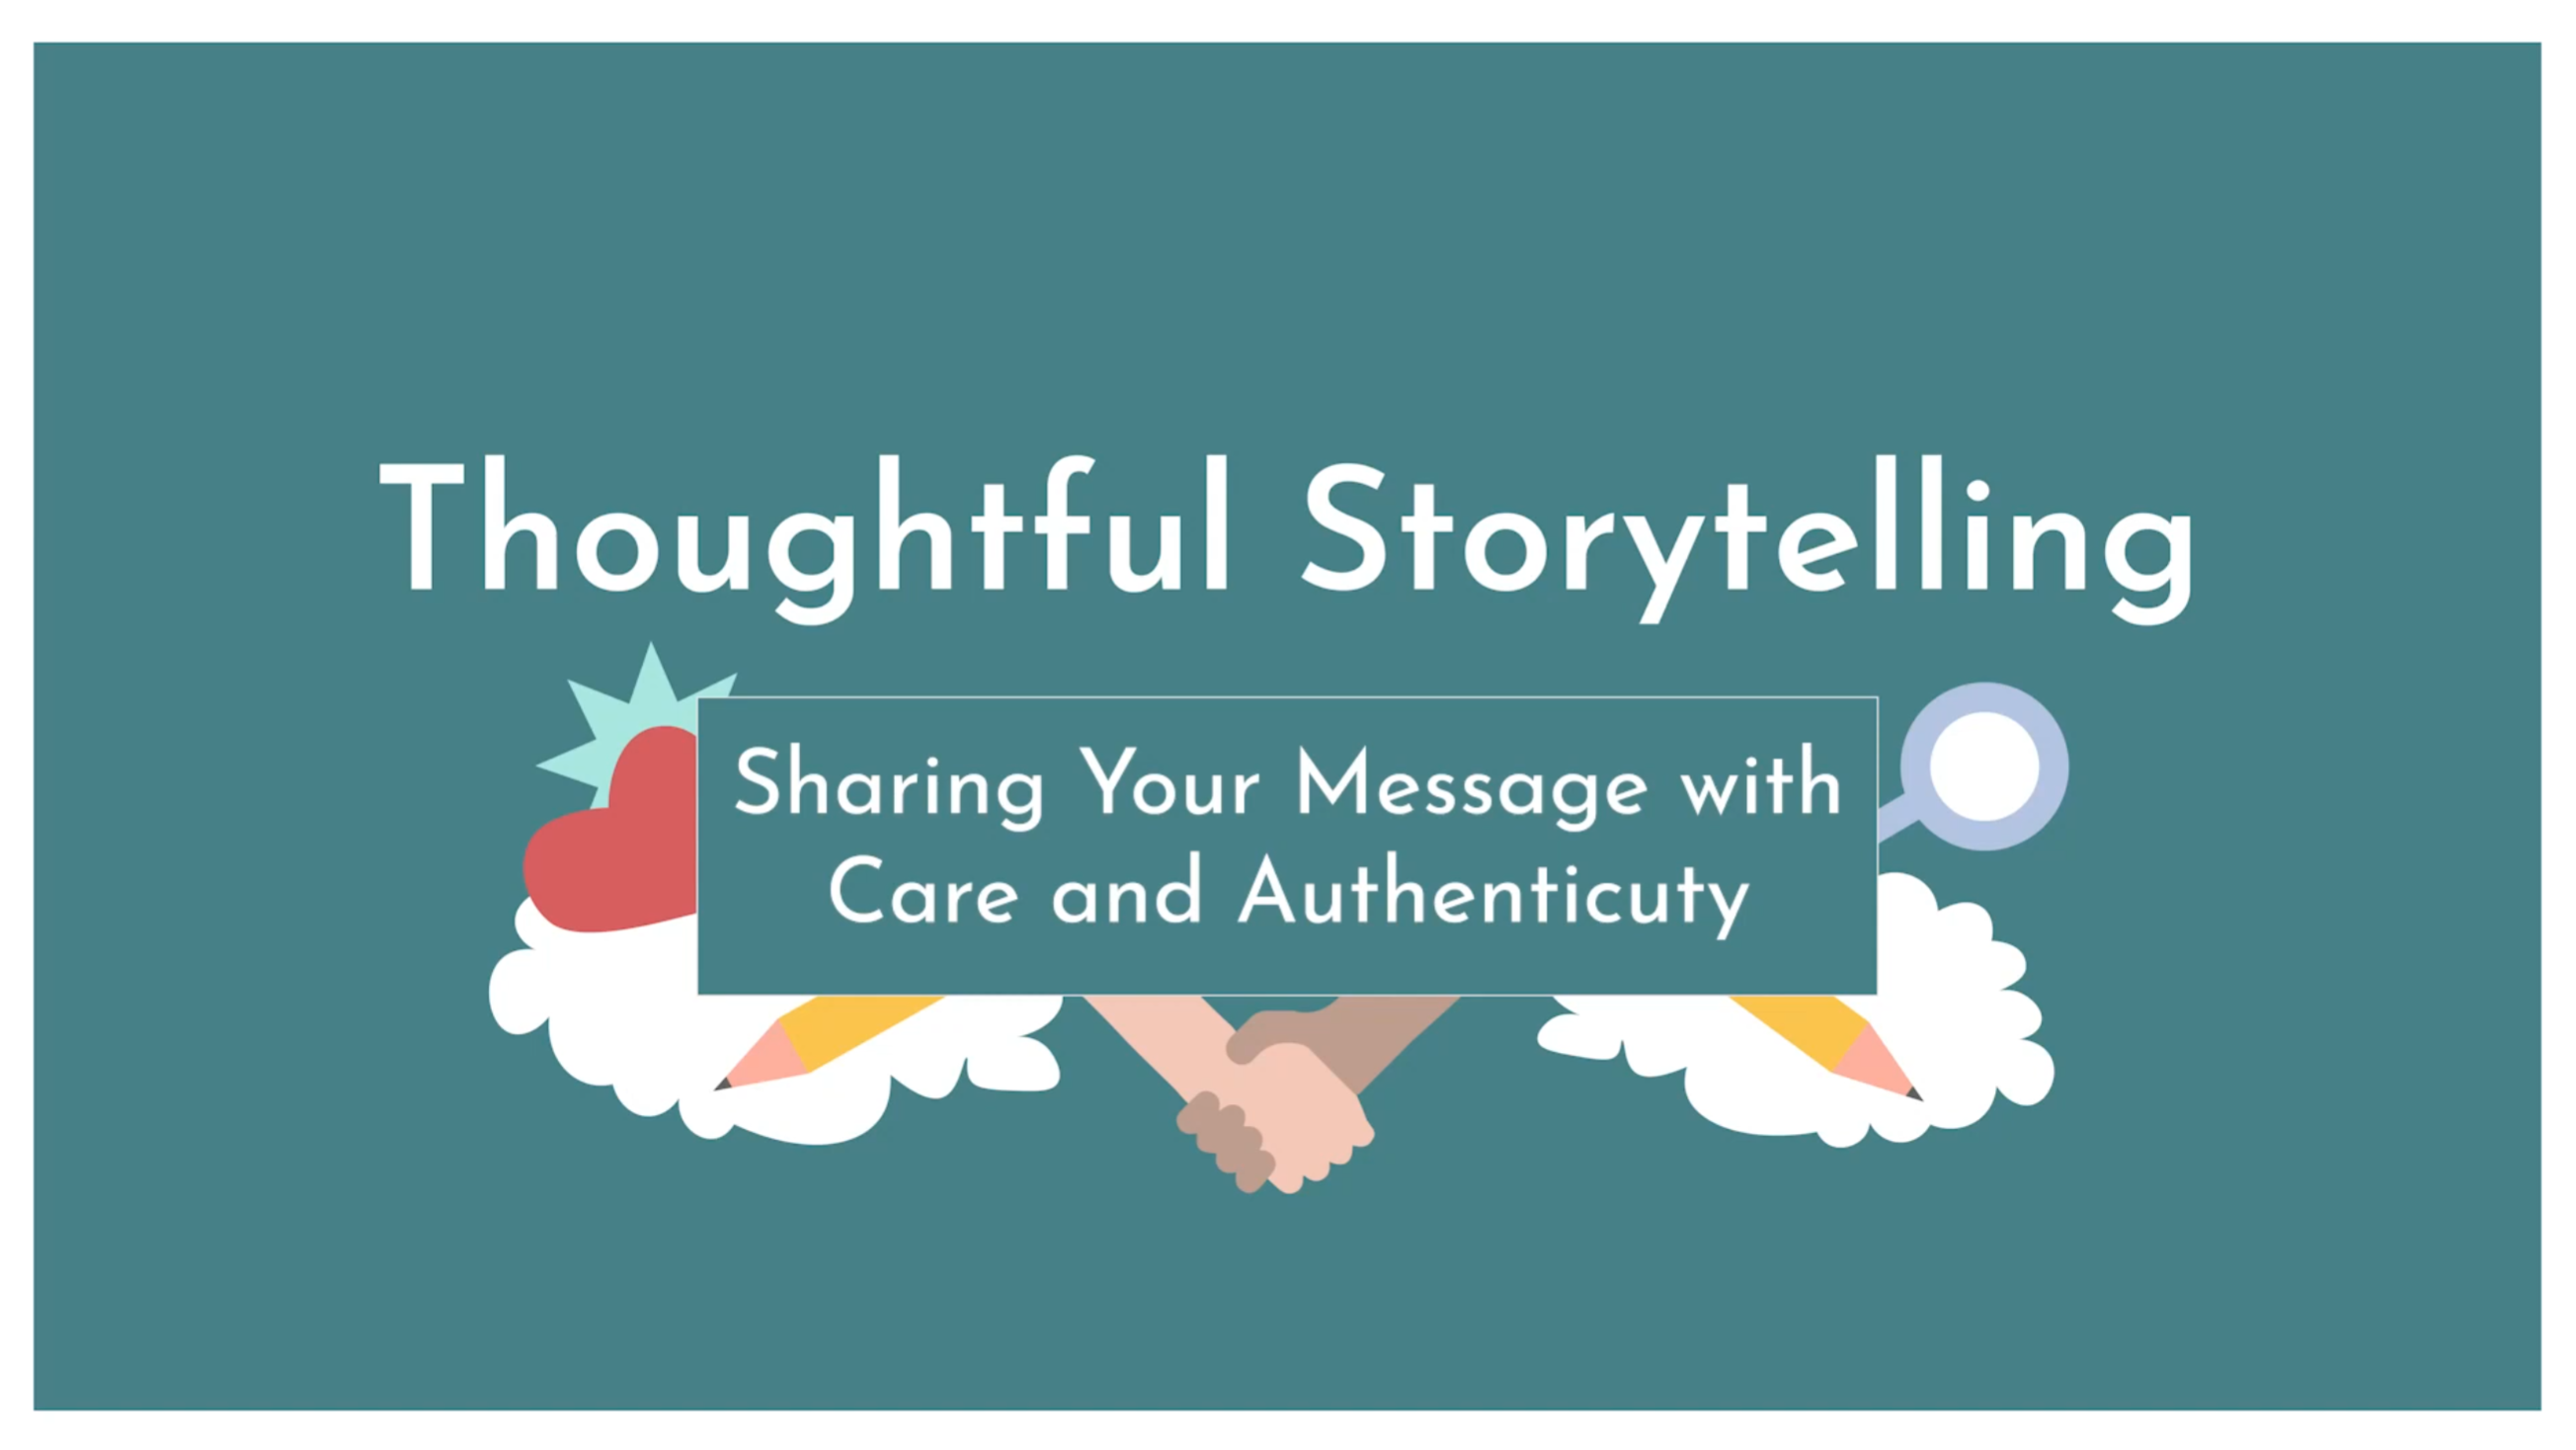 White text on a turquoise background, reads: Thoughtful Storytelling - Sharing Your Message with Care and Authenticity. Surrounding the words are small icons including a heart, a magnifying glass, pencils, and two hands united in a handshake